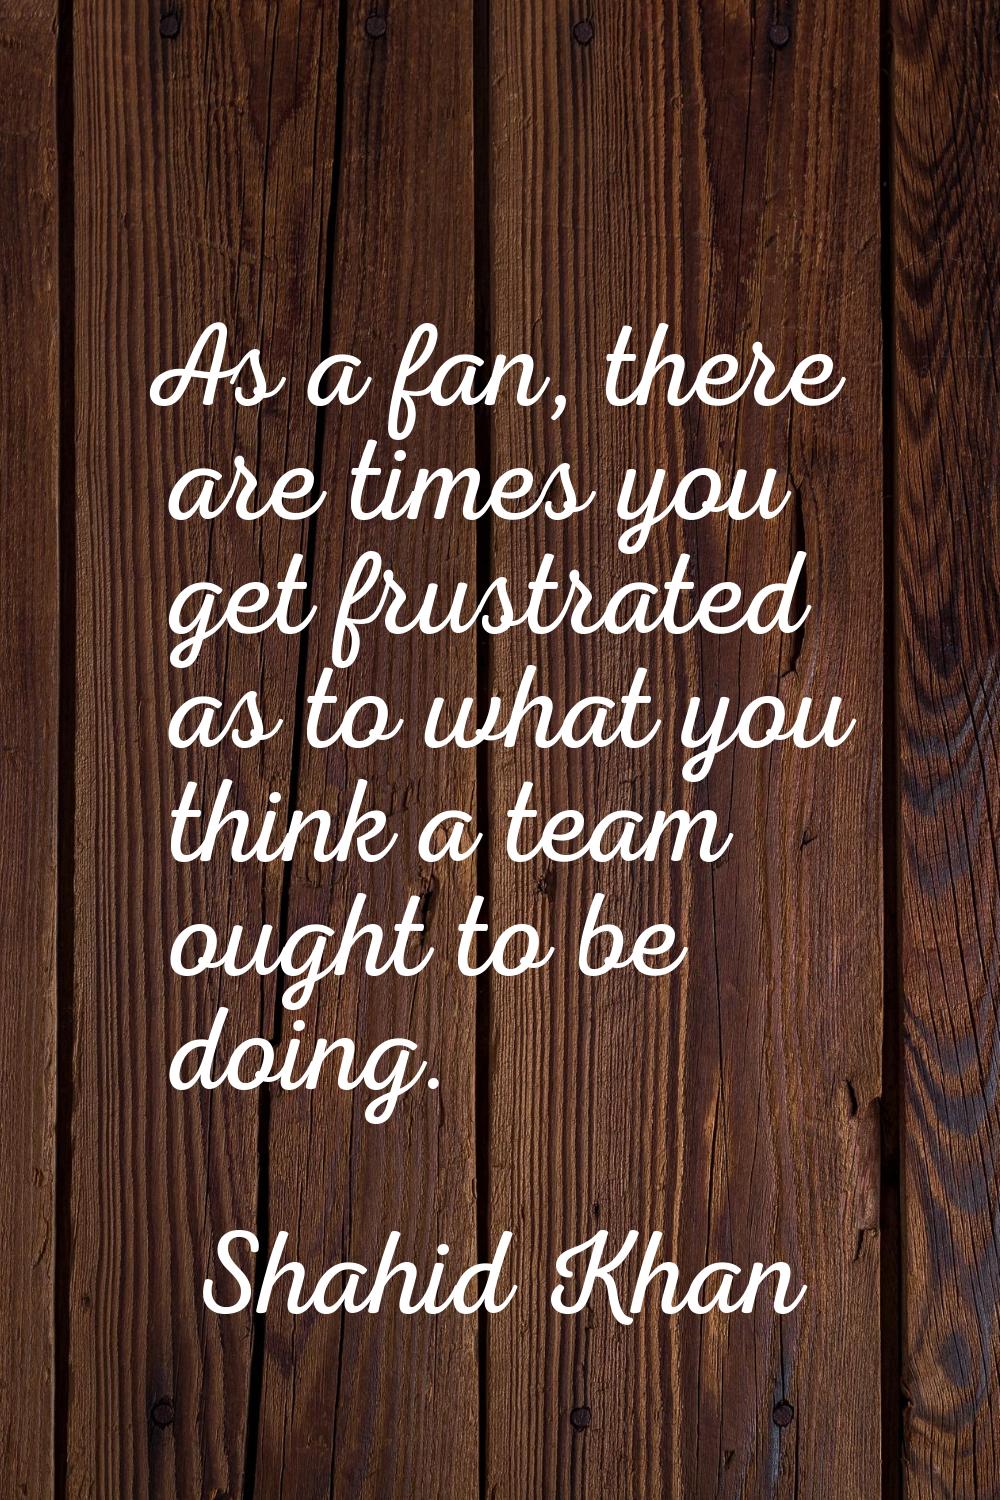 As a fan, there are times you get frustrated as to what you think a team ought to be doing.